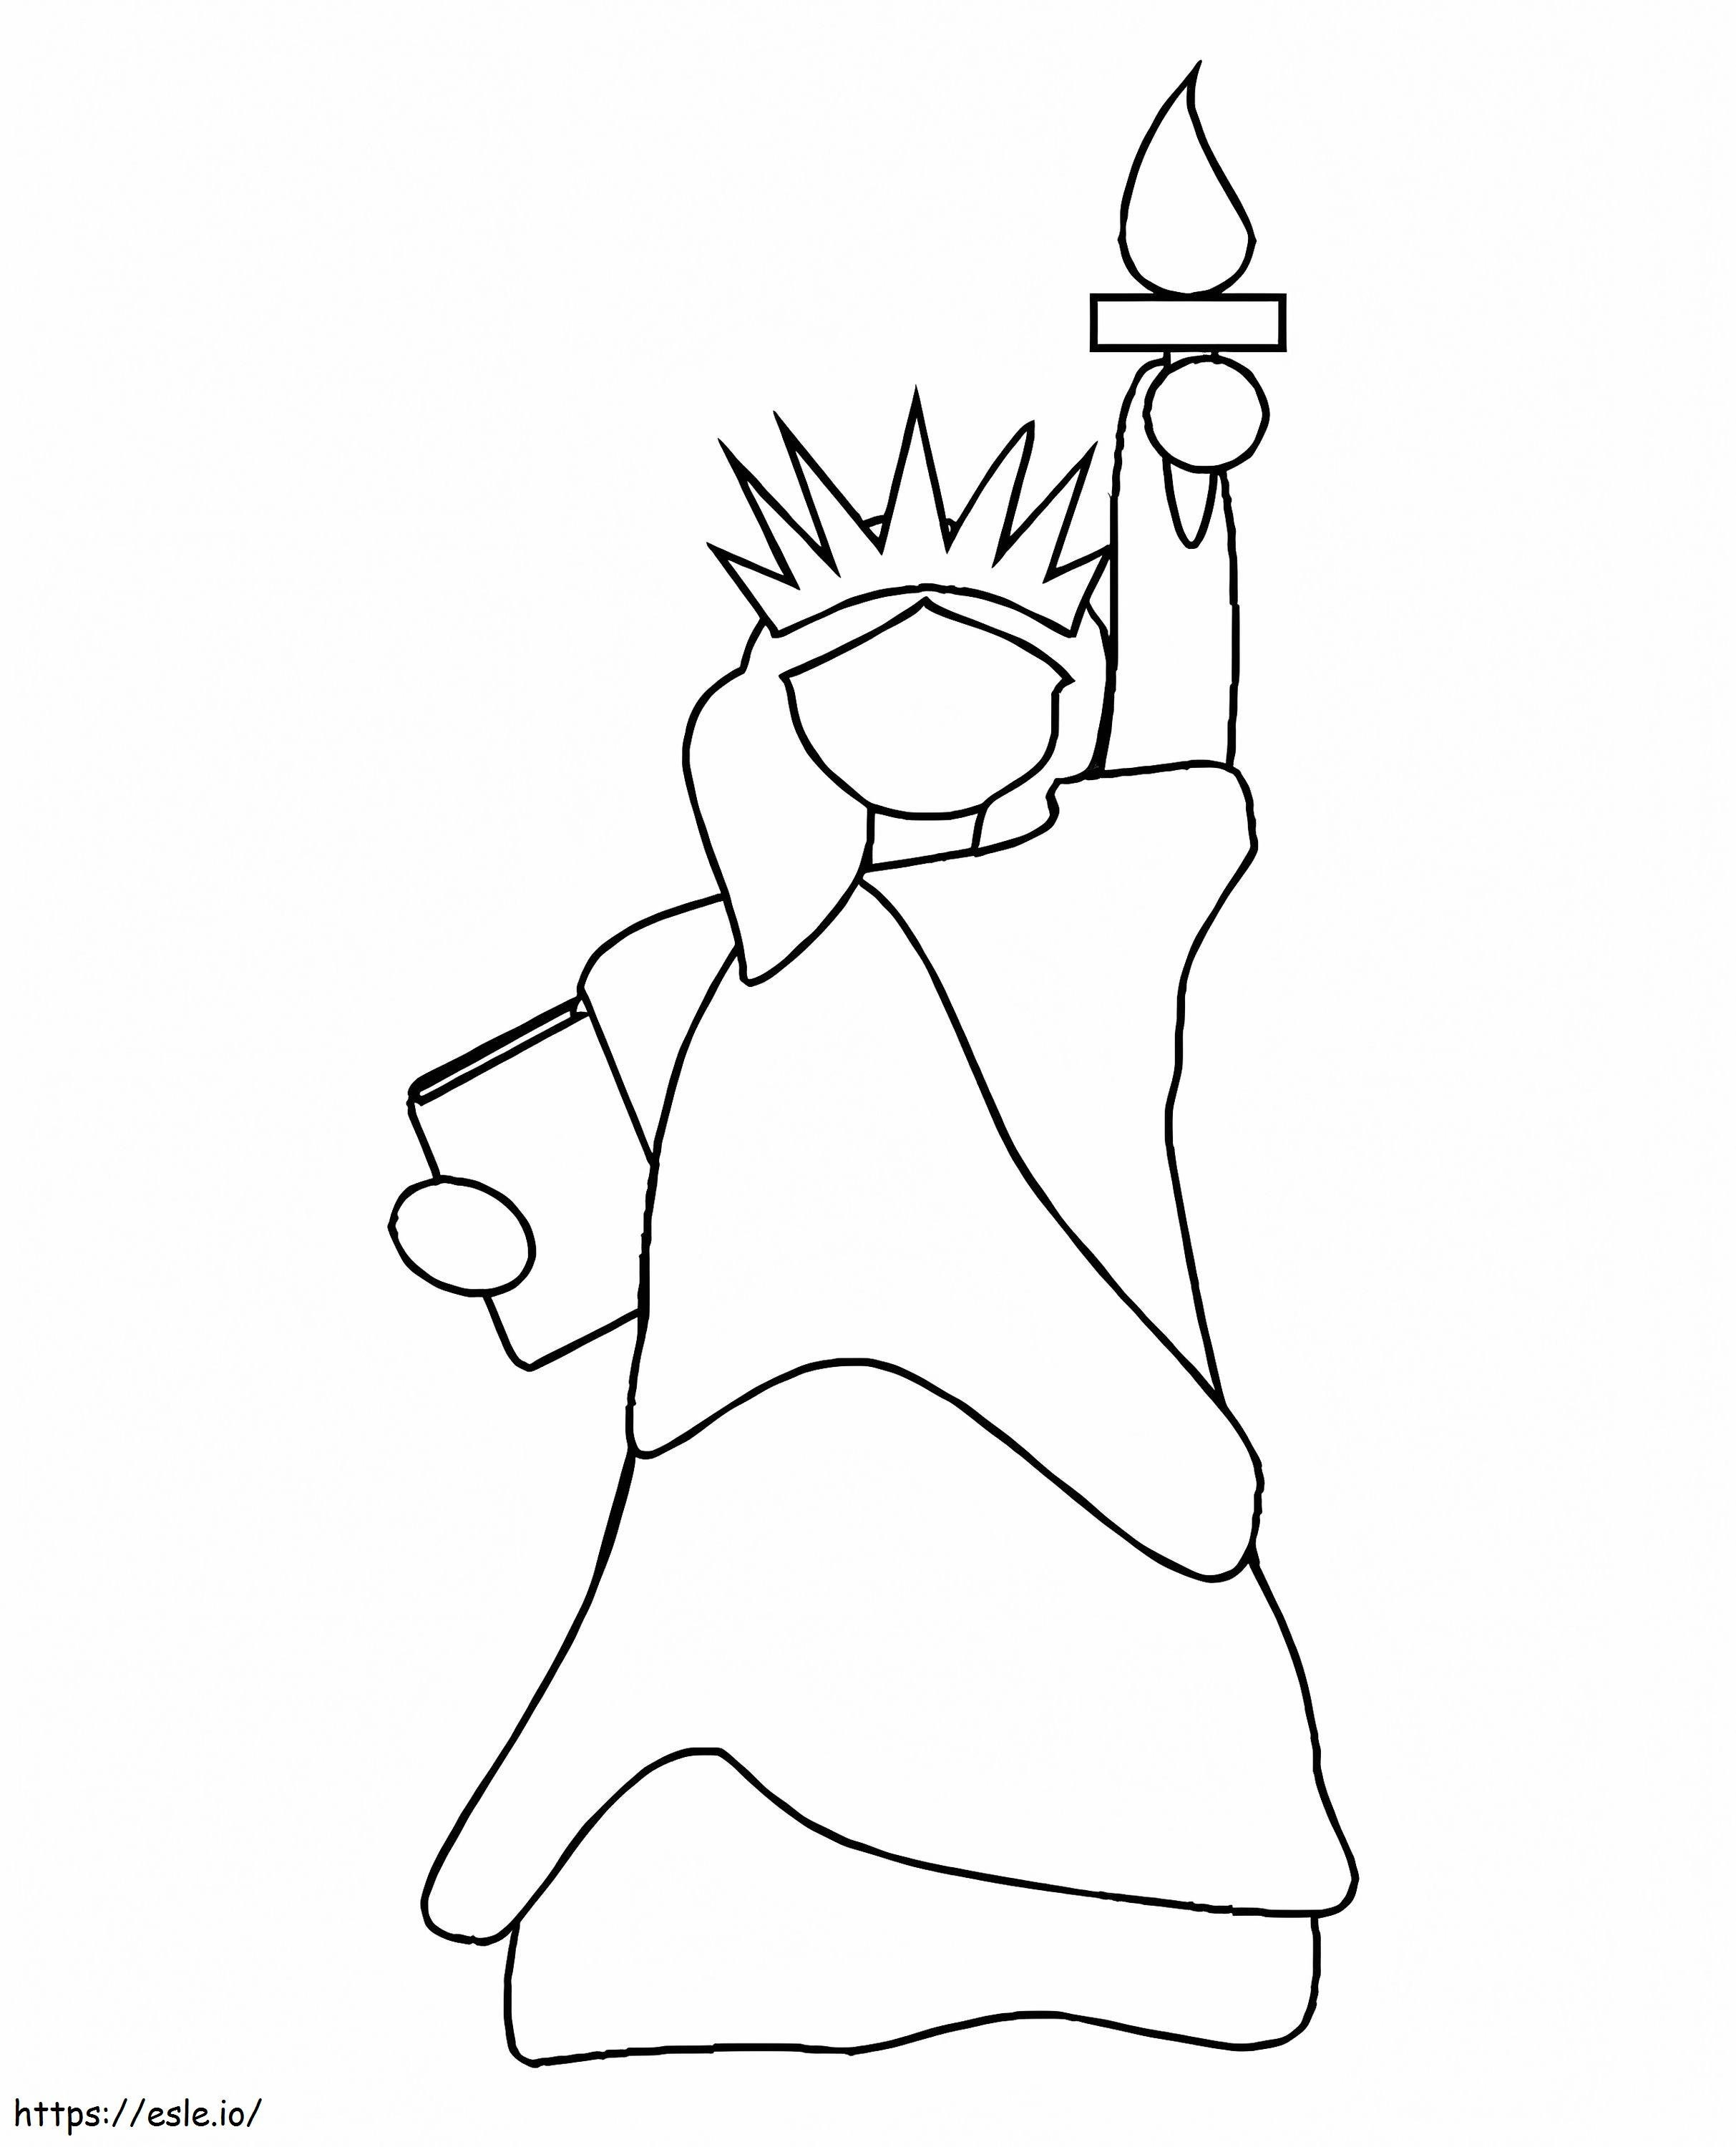 Statue of liberty outline coloring page